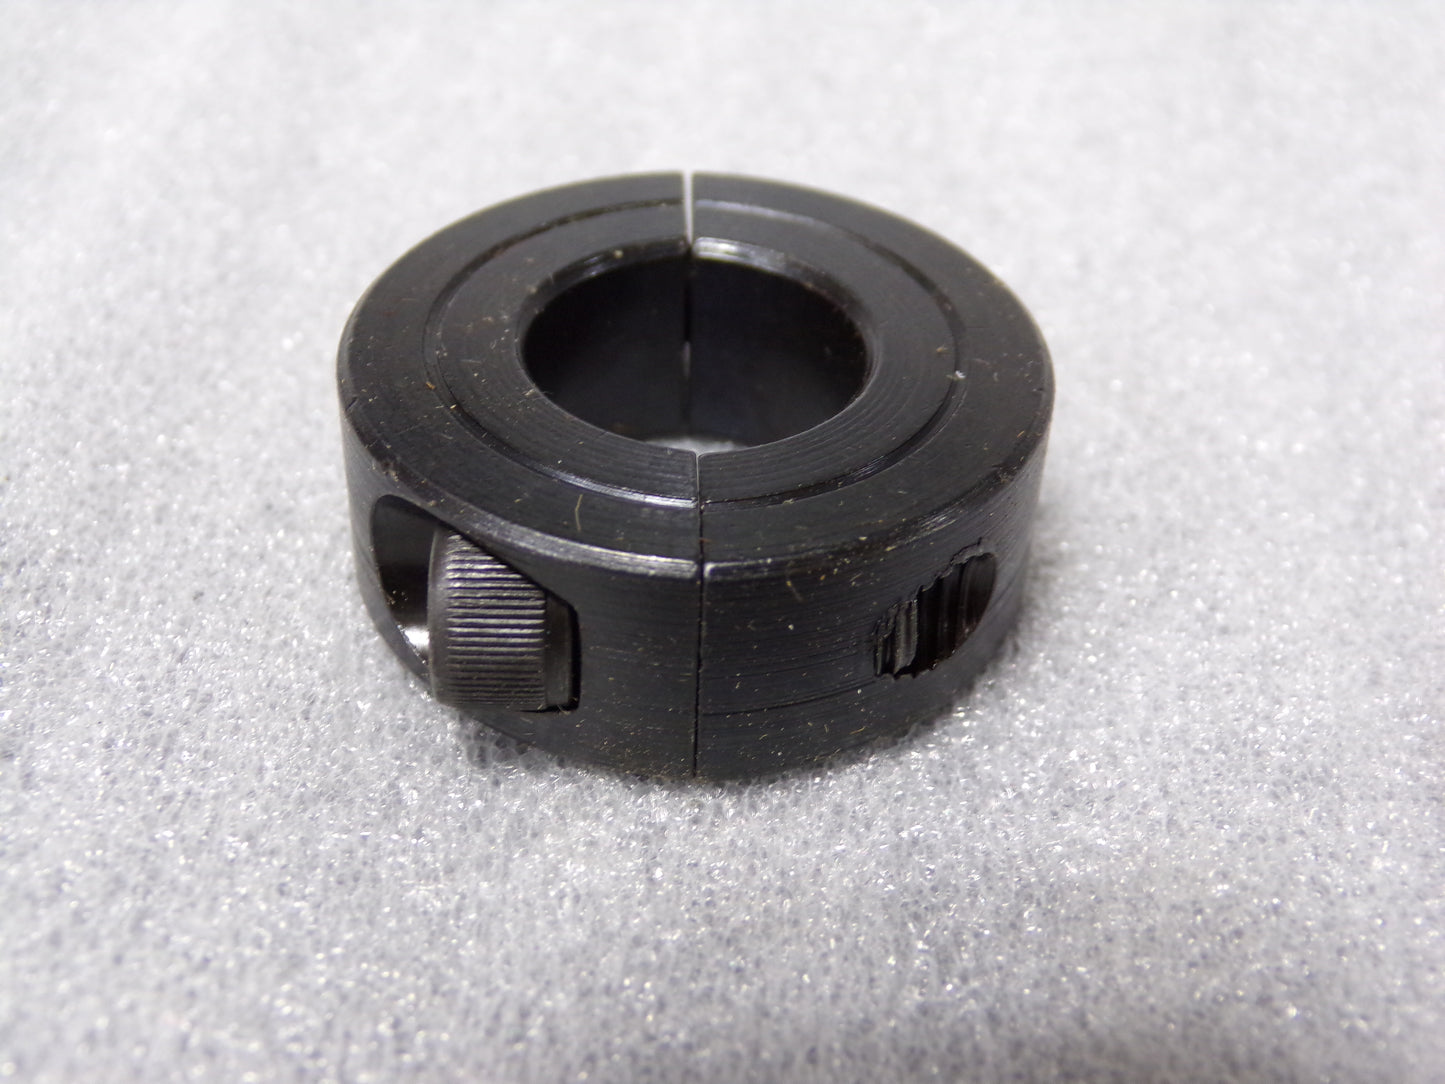 CLIMAX METAL PRODUCTS Black Oxide Steel Shaft Collar, Clamp Collar Style, Standard Dimension Type, 3/4 in Bore Dia. (CR00178-BT26)